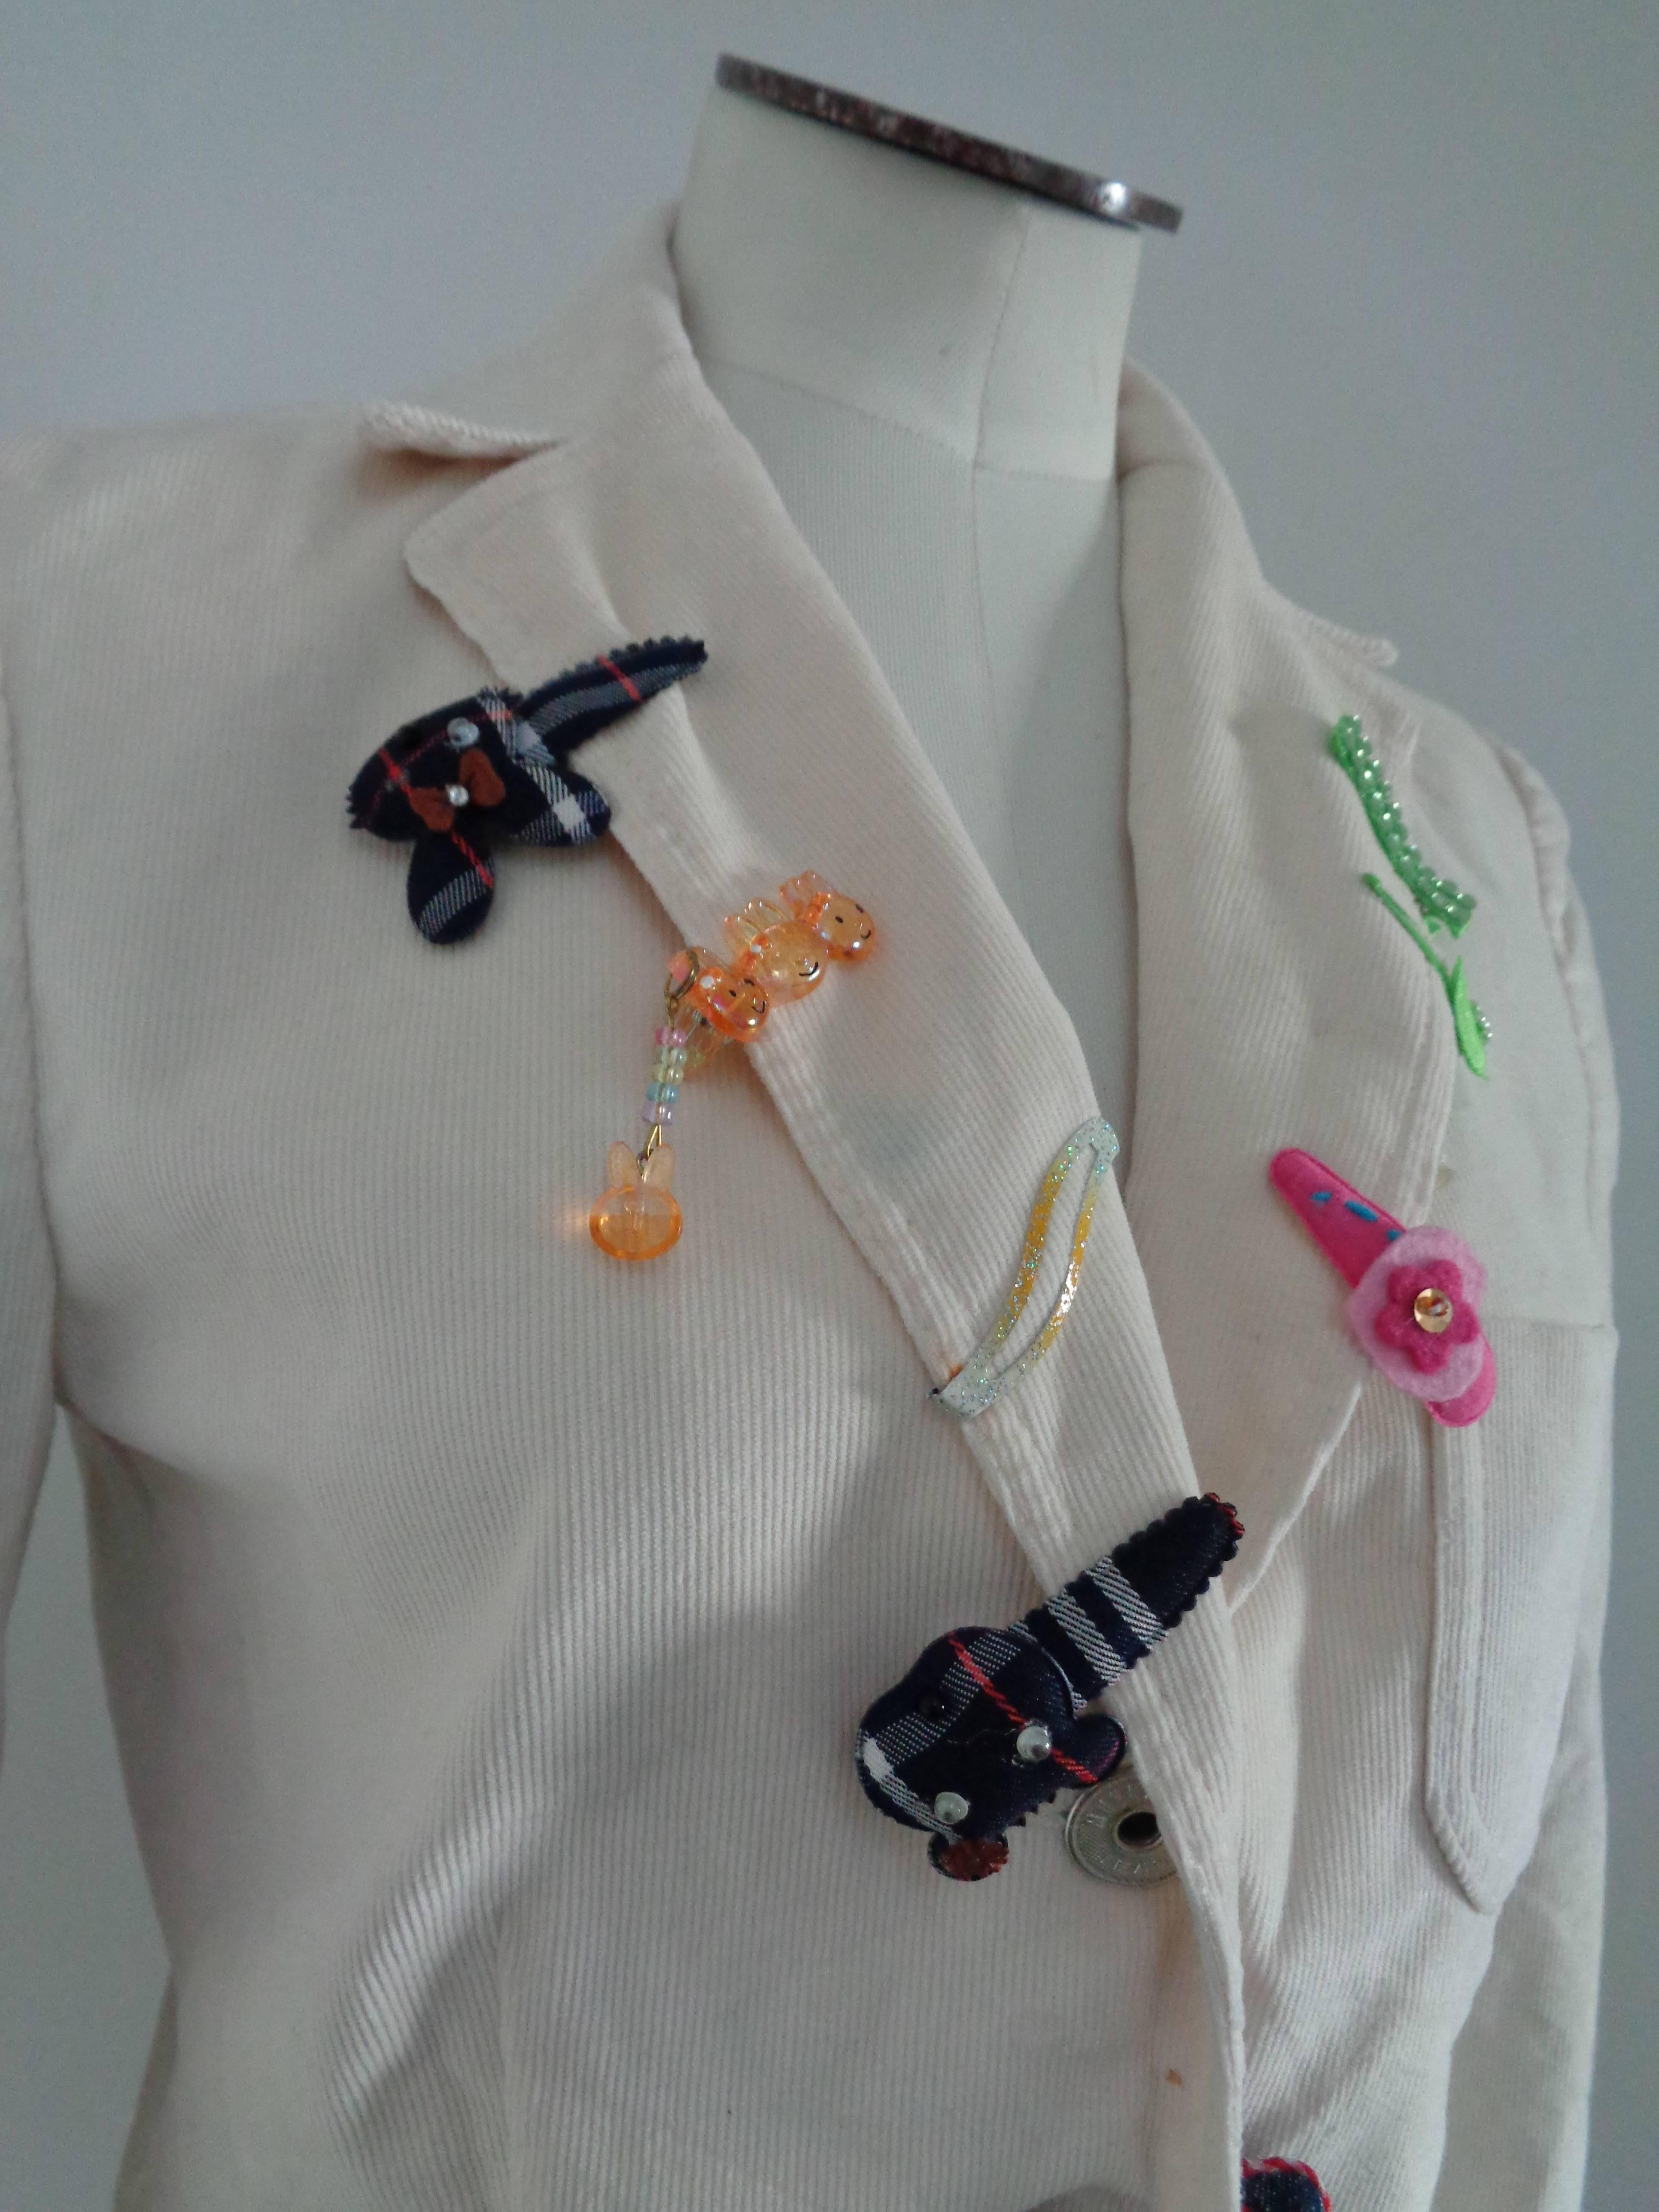 Moschino Jeans White cotton Jacket
Embellished with hair clips all over with different designs

Totally made in italy in size 46

Composition cotton